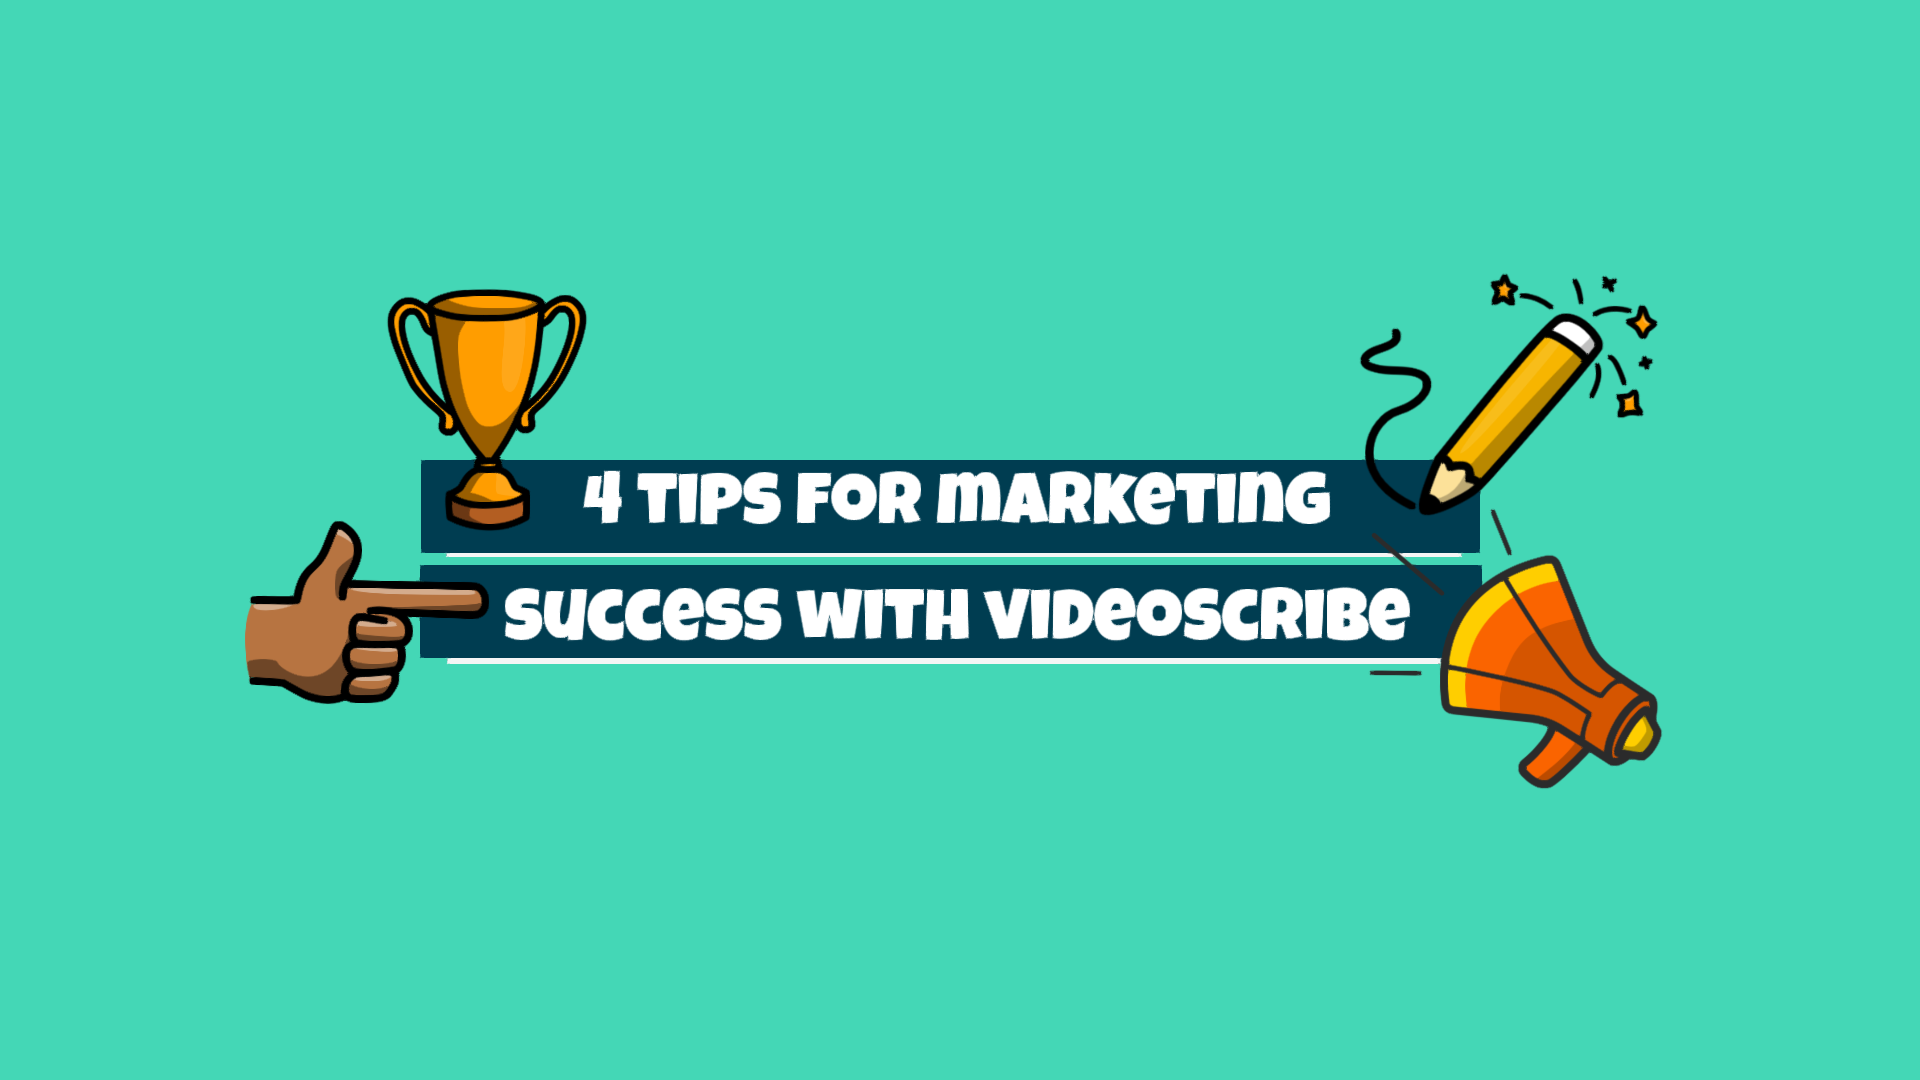 4 Tips for Marketing Success with VideoScribe